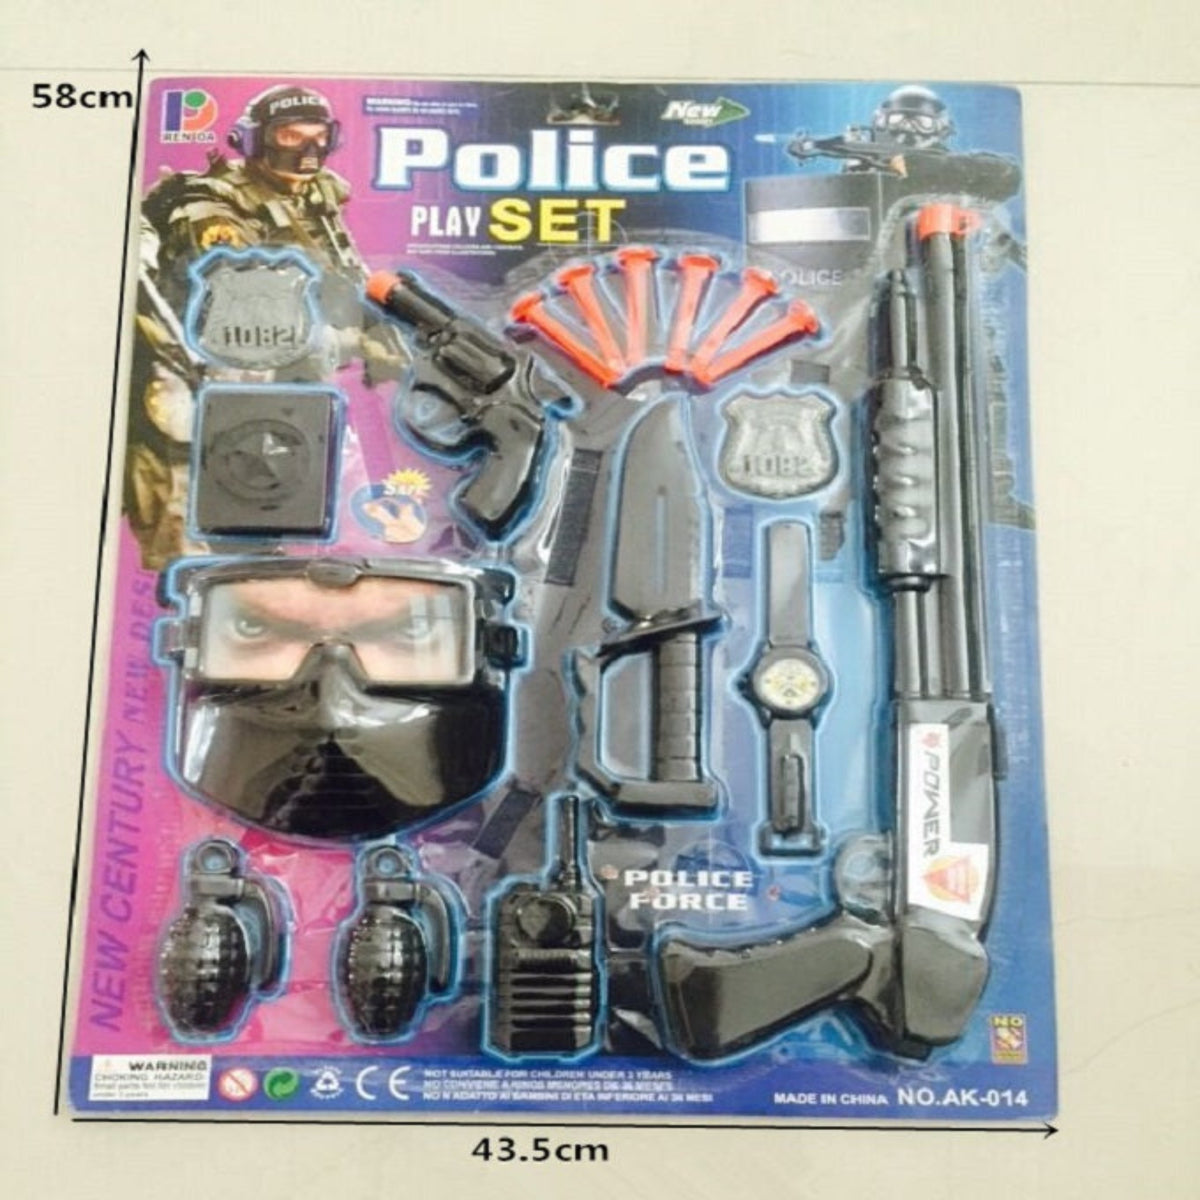 16 PC Toy Pretend Play Police Play Sets Wholesale (MOQ 3)